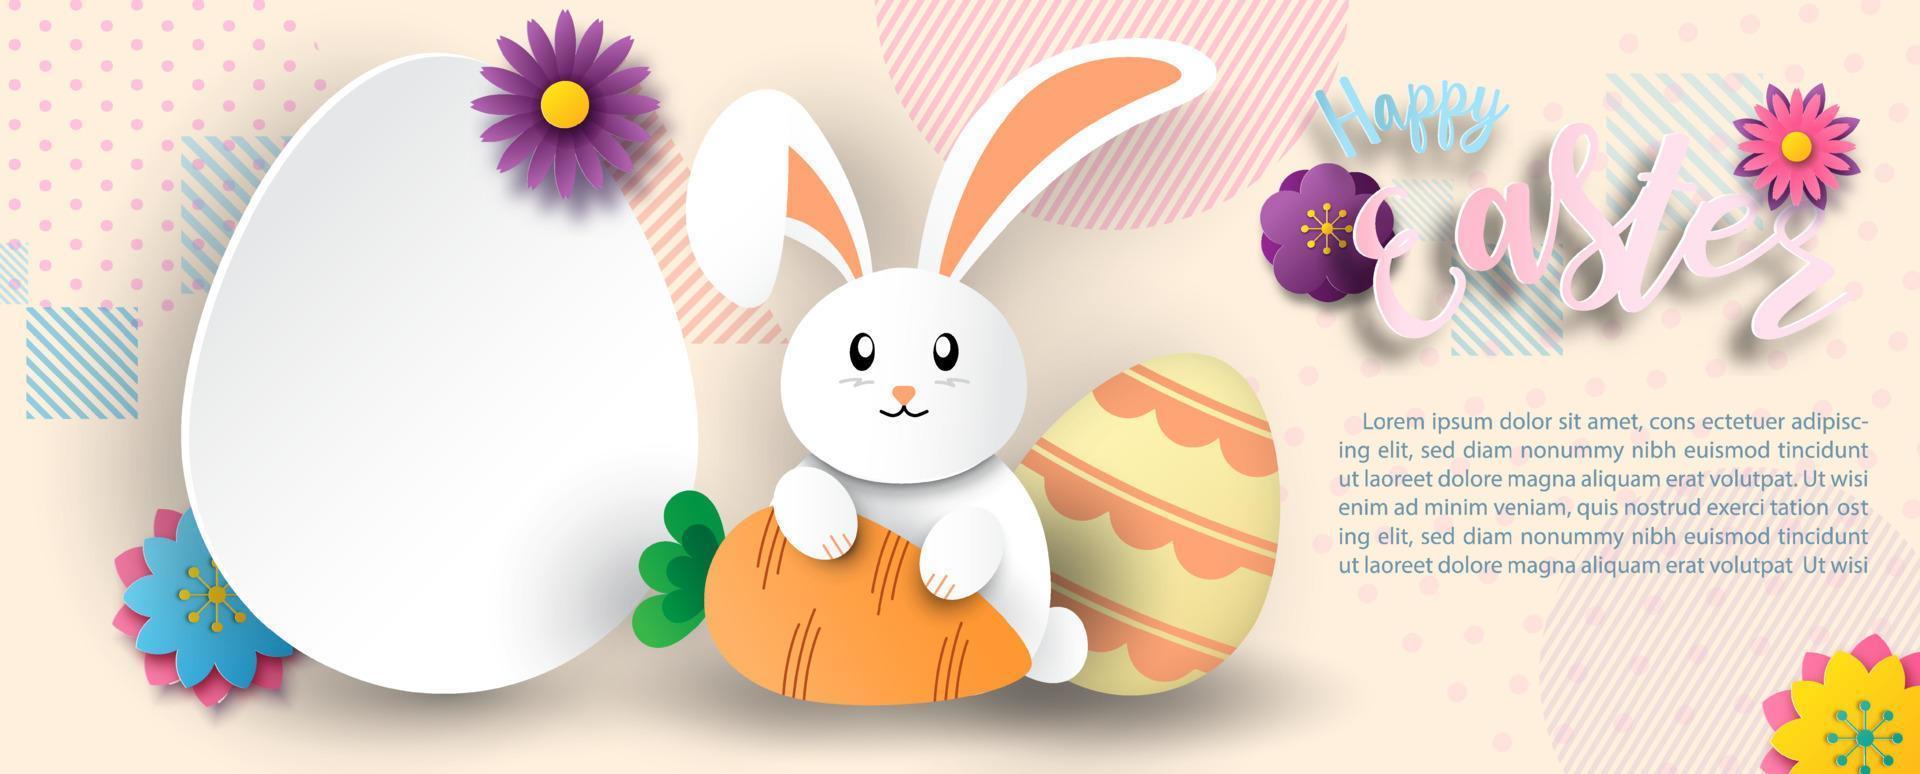 White and cute bunny holding a carrot with white banner in an egg shape on flowers and abstract pattern background. Easter day greeting card in paper cut style and vector design.